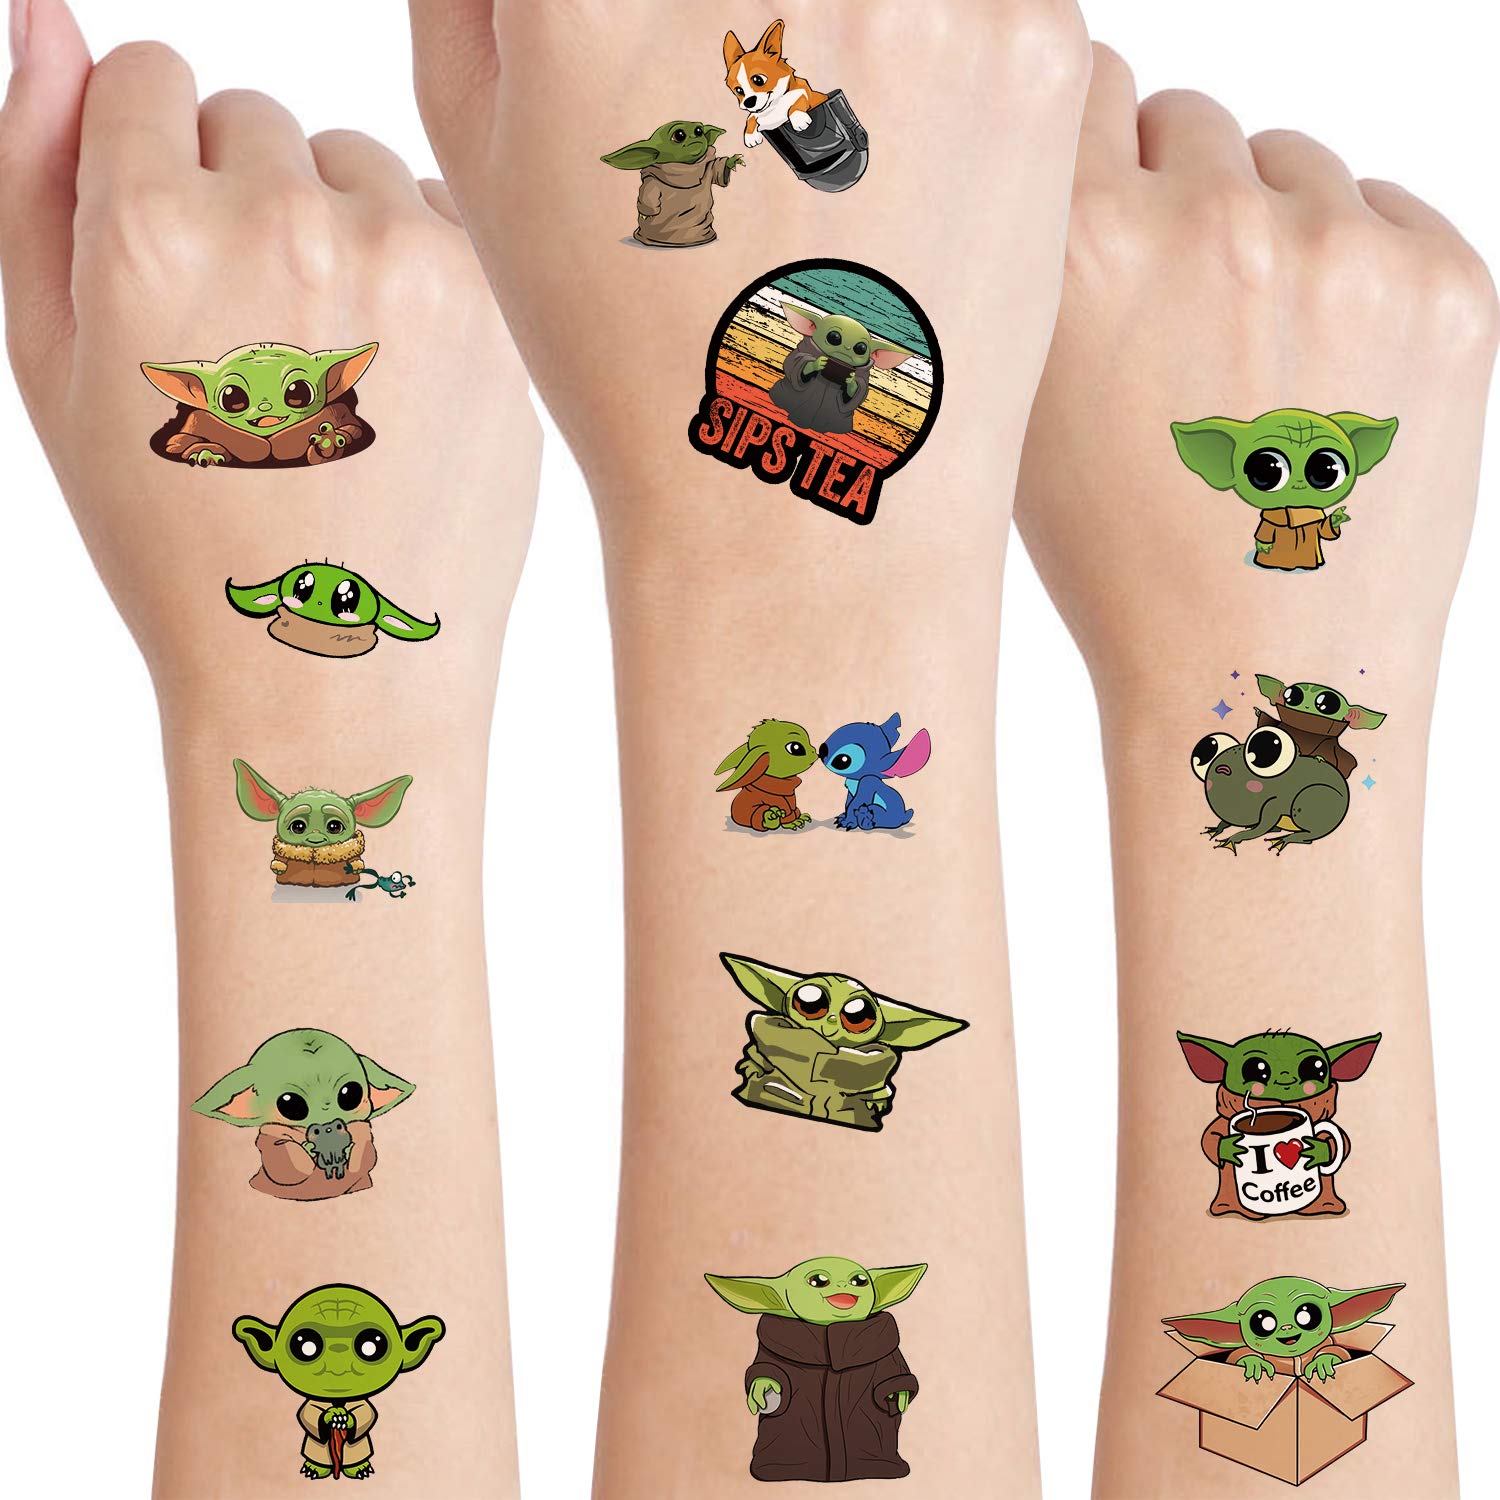 Cute Alien Temporary Tattoos Art Craft Party Favors Party Supplies for Kids  Alien Theme Birthday Party Baby Shower Yoda Fake Tattoos School Reward,  Birthday Gifts